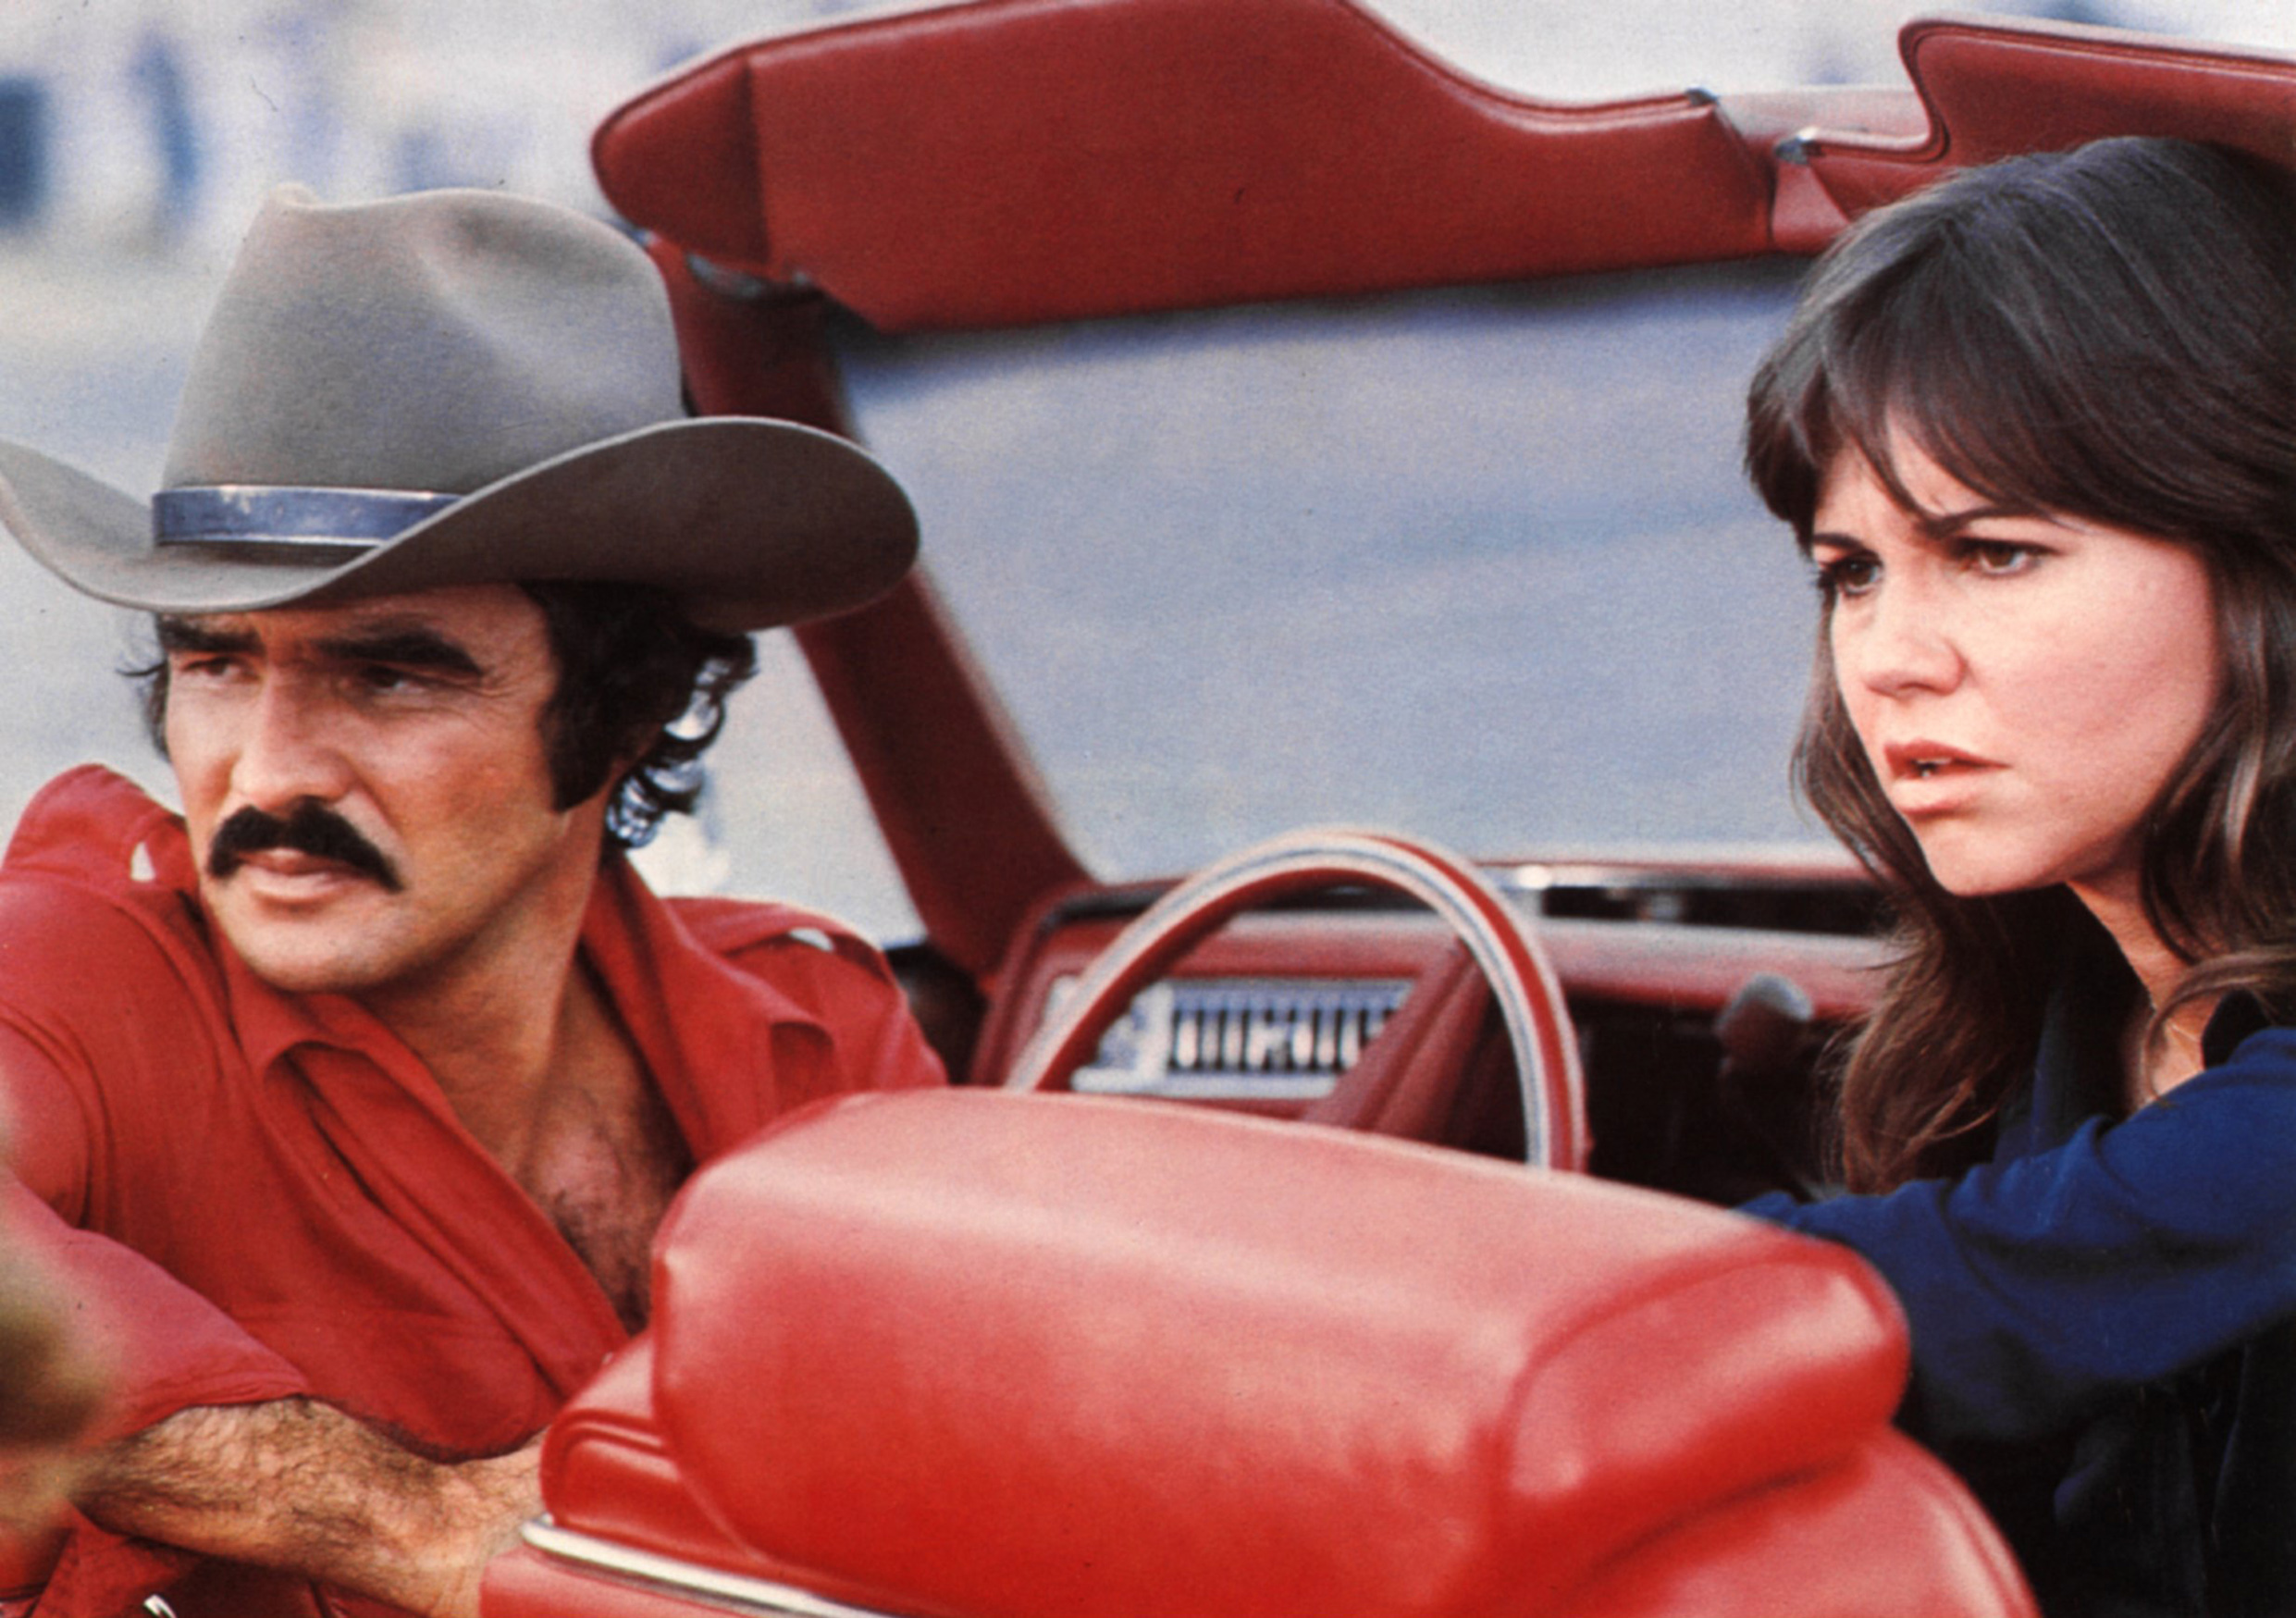 Sally Field and Burt Reynolds on January 1, 1976. | Source: Getty Images